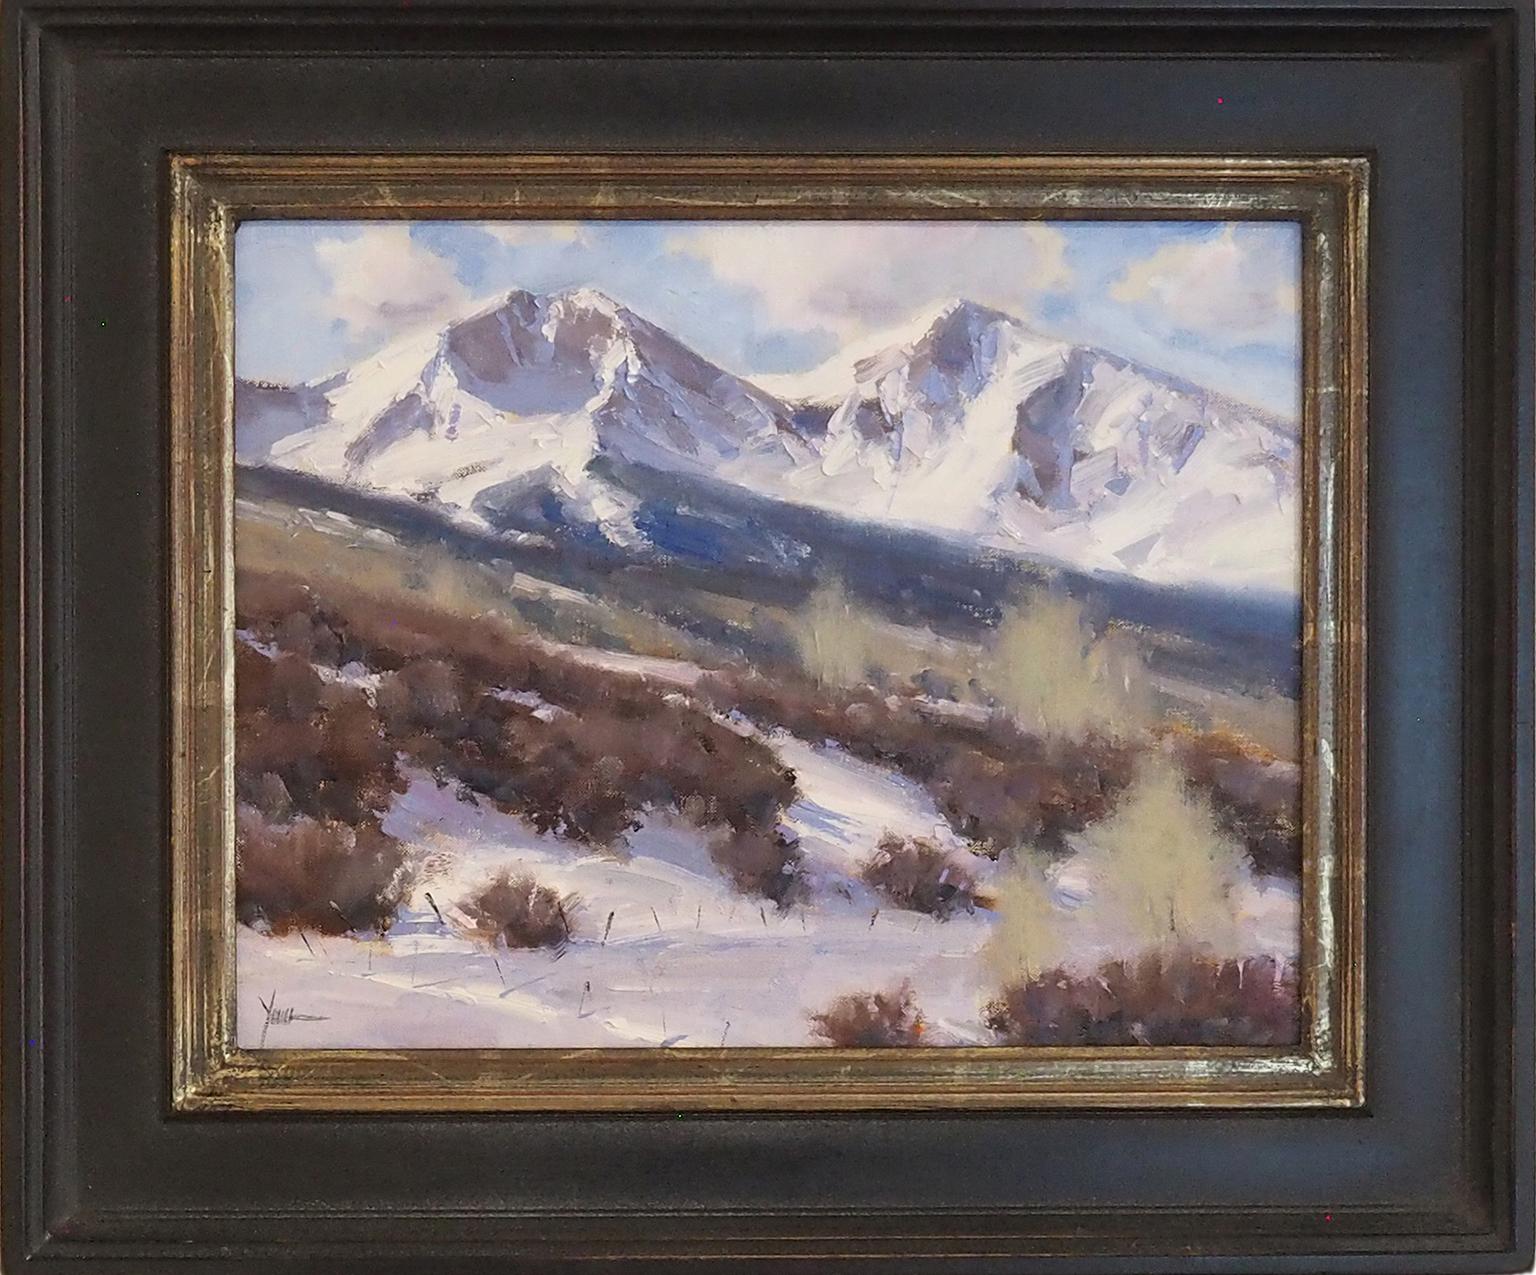 Dan Young Landscape Painting - Below Sopris Mountain Ranch (colors of snow, shadows, winter)